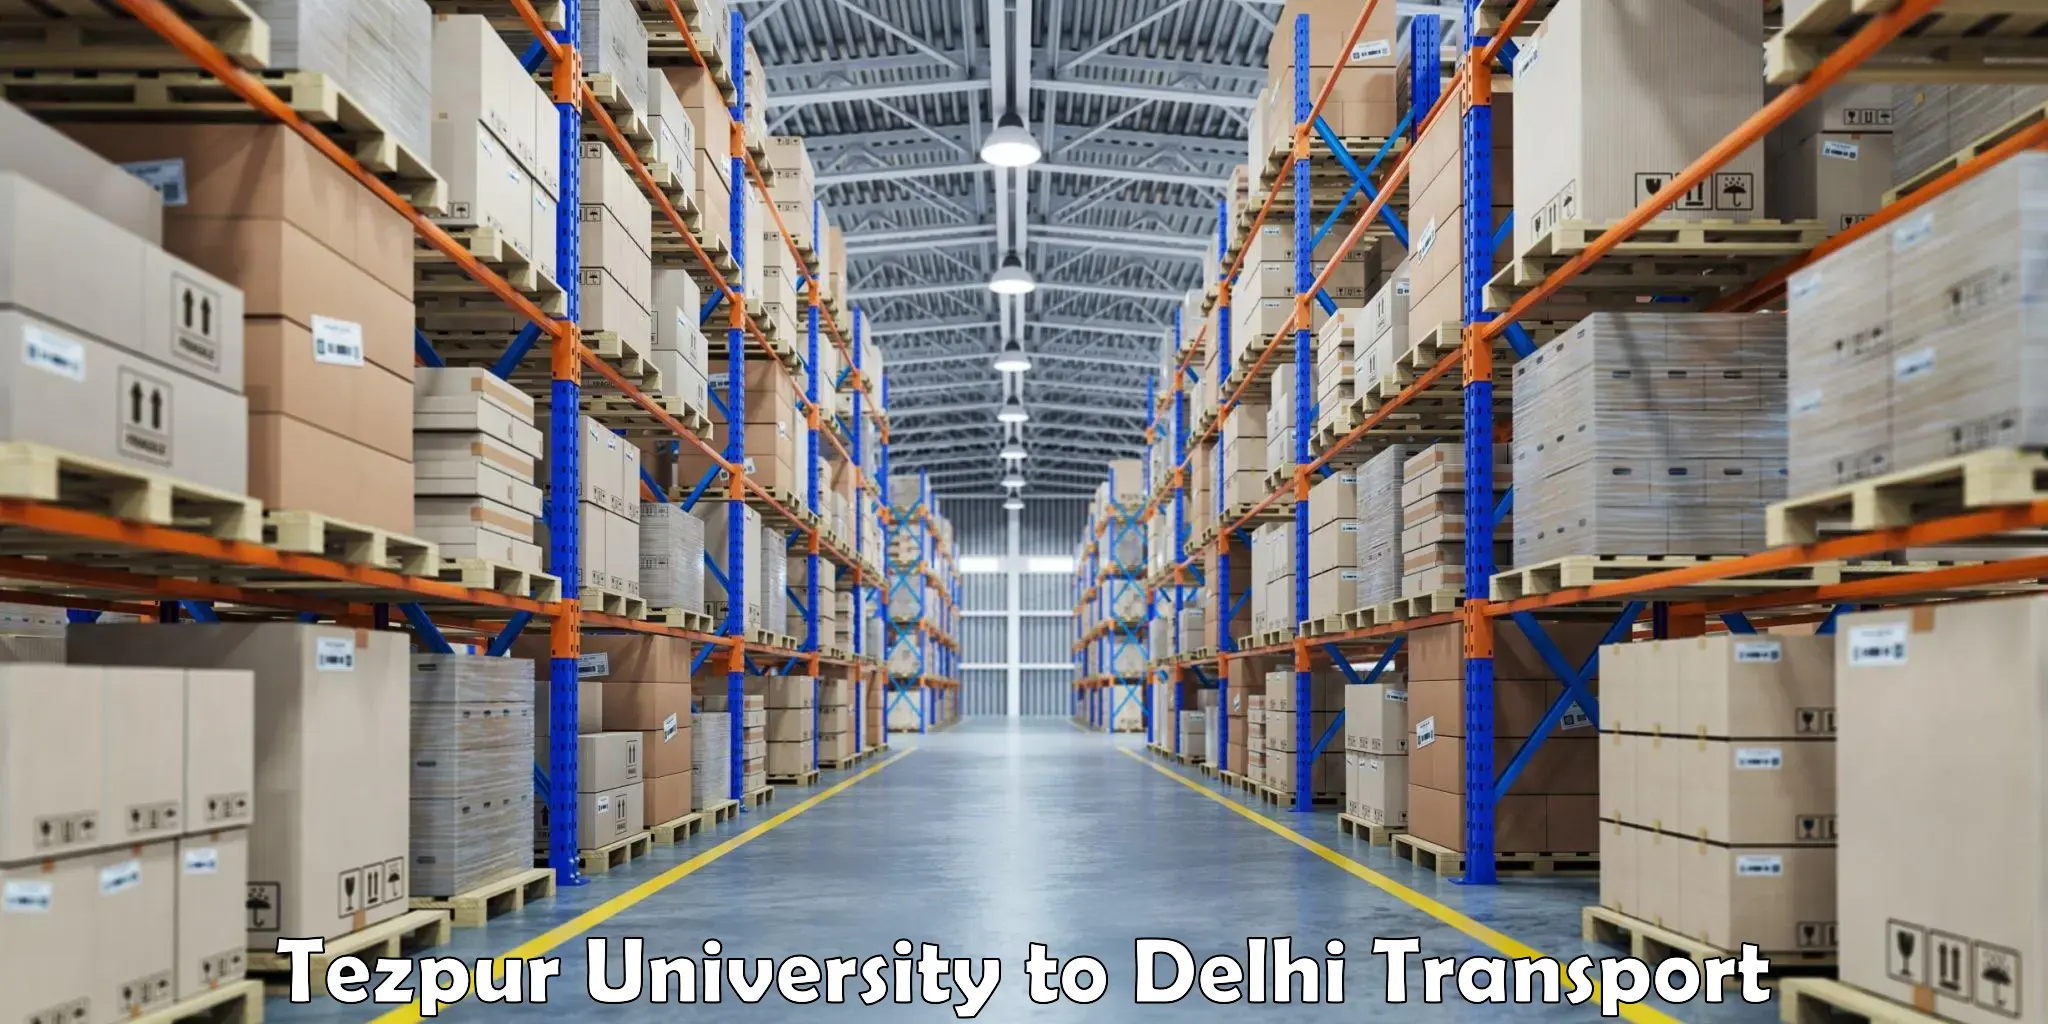 Air freight transport services Tezpur University to East Delhi